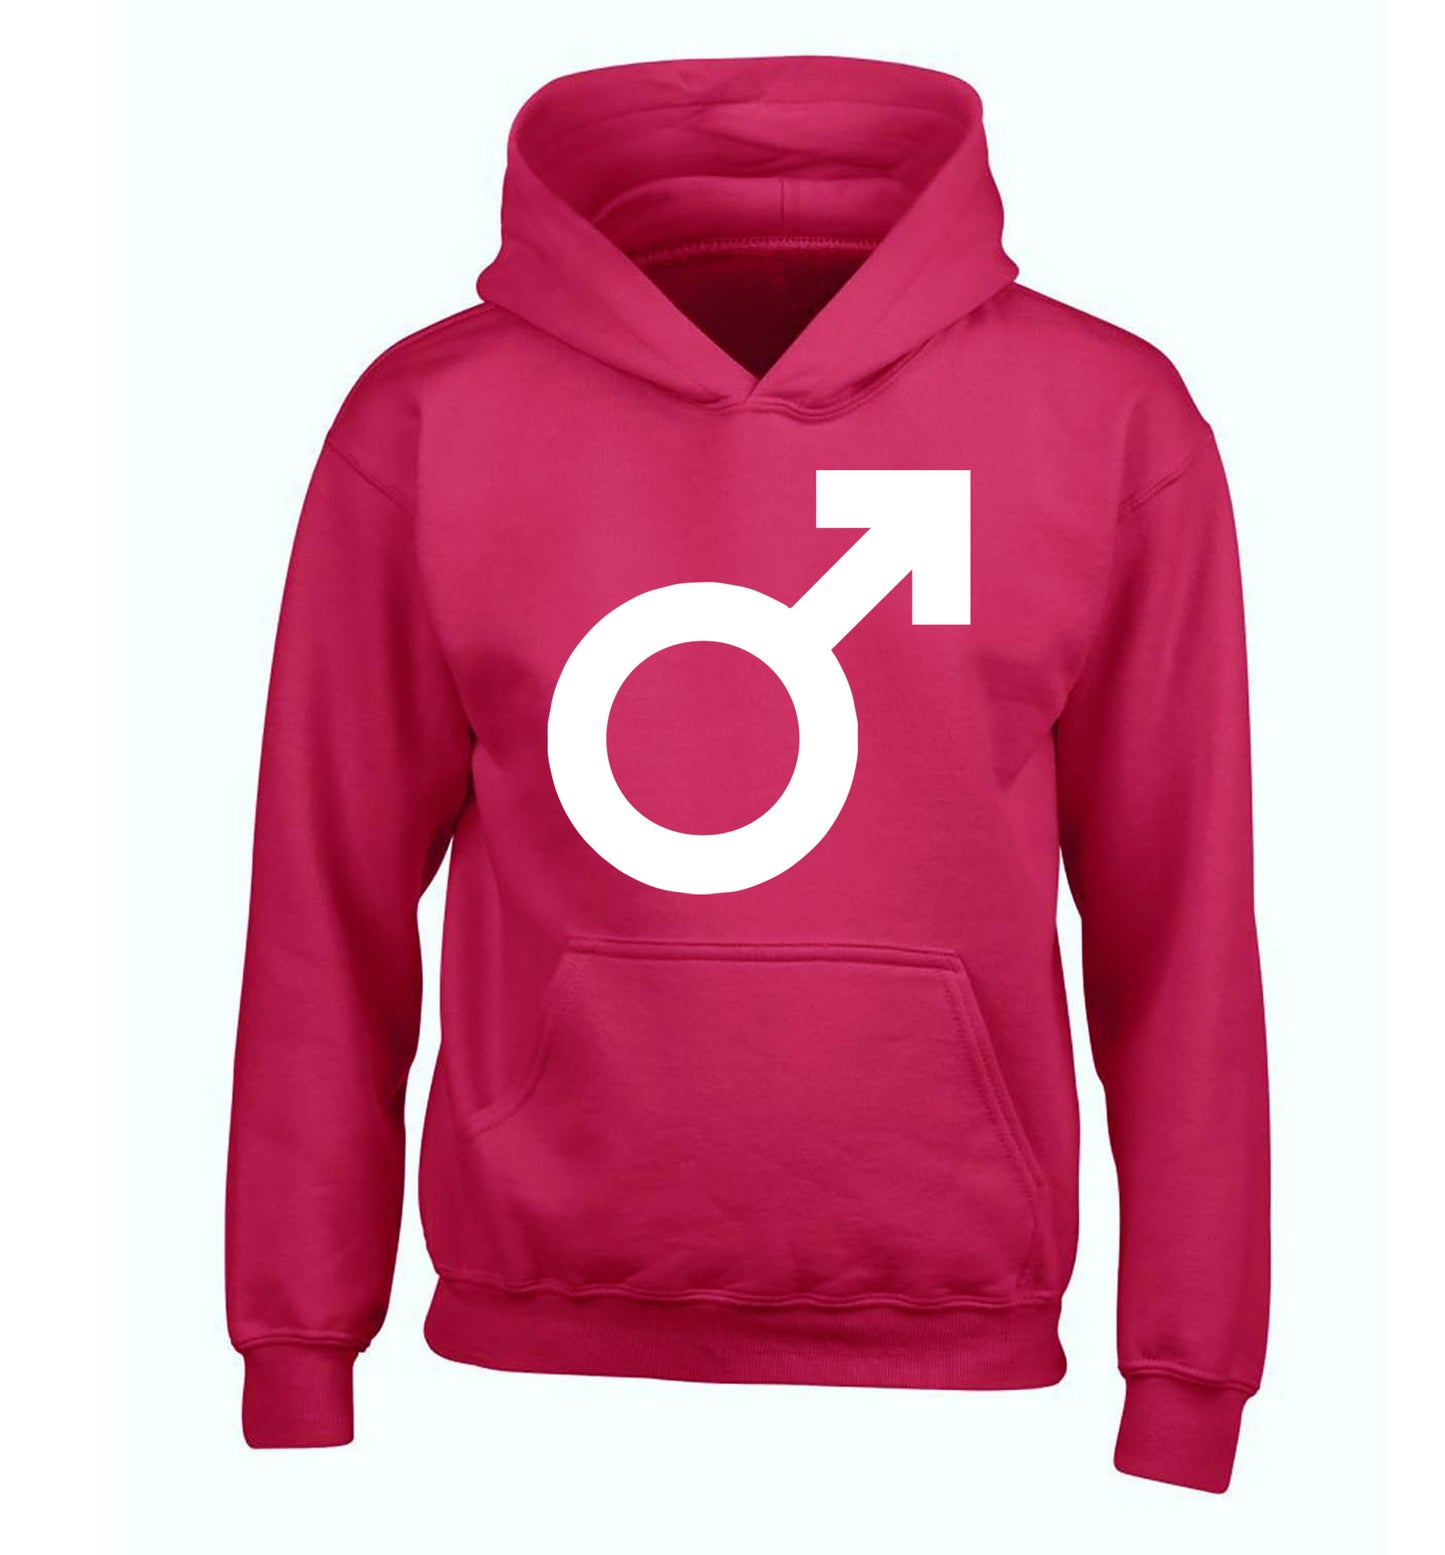 Male symbol large children's pink hoodie 12-14 Years